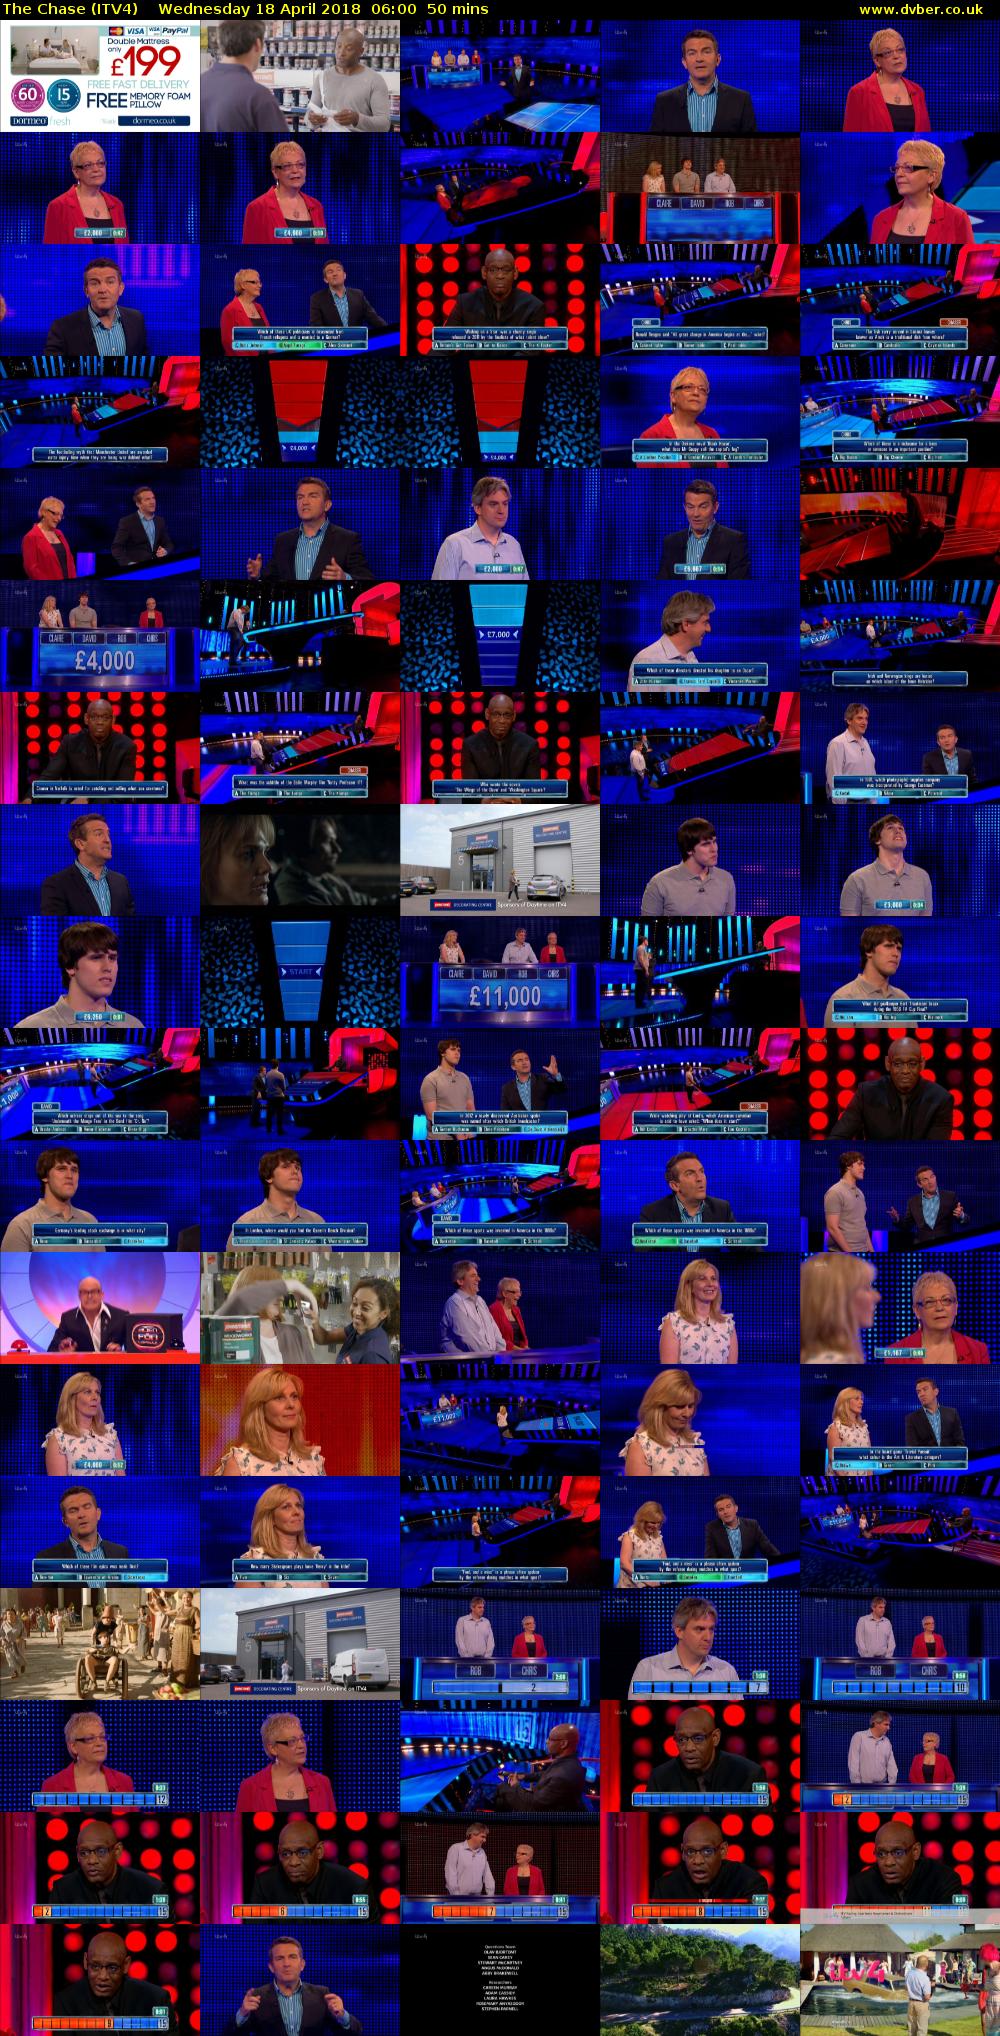 The Chase (ITV4) Wednesday 18 April 2018 06:00 - 06:50